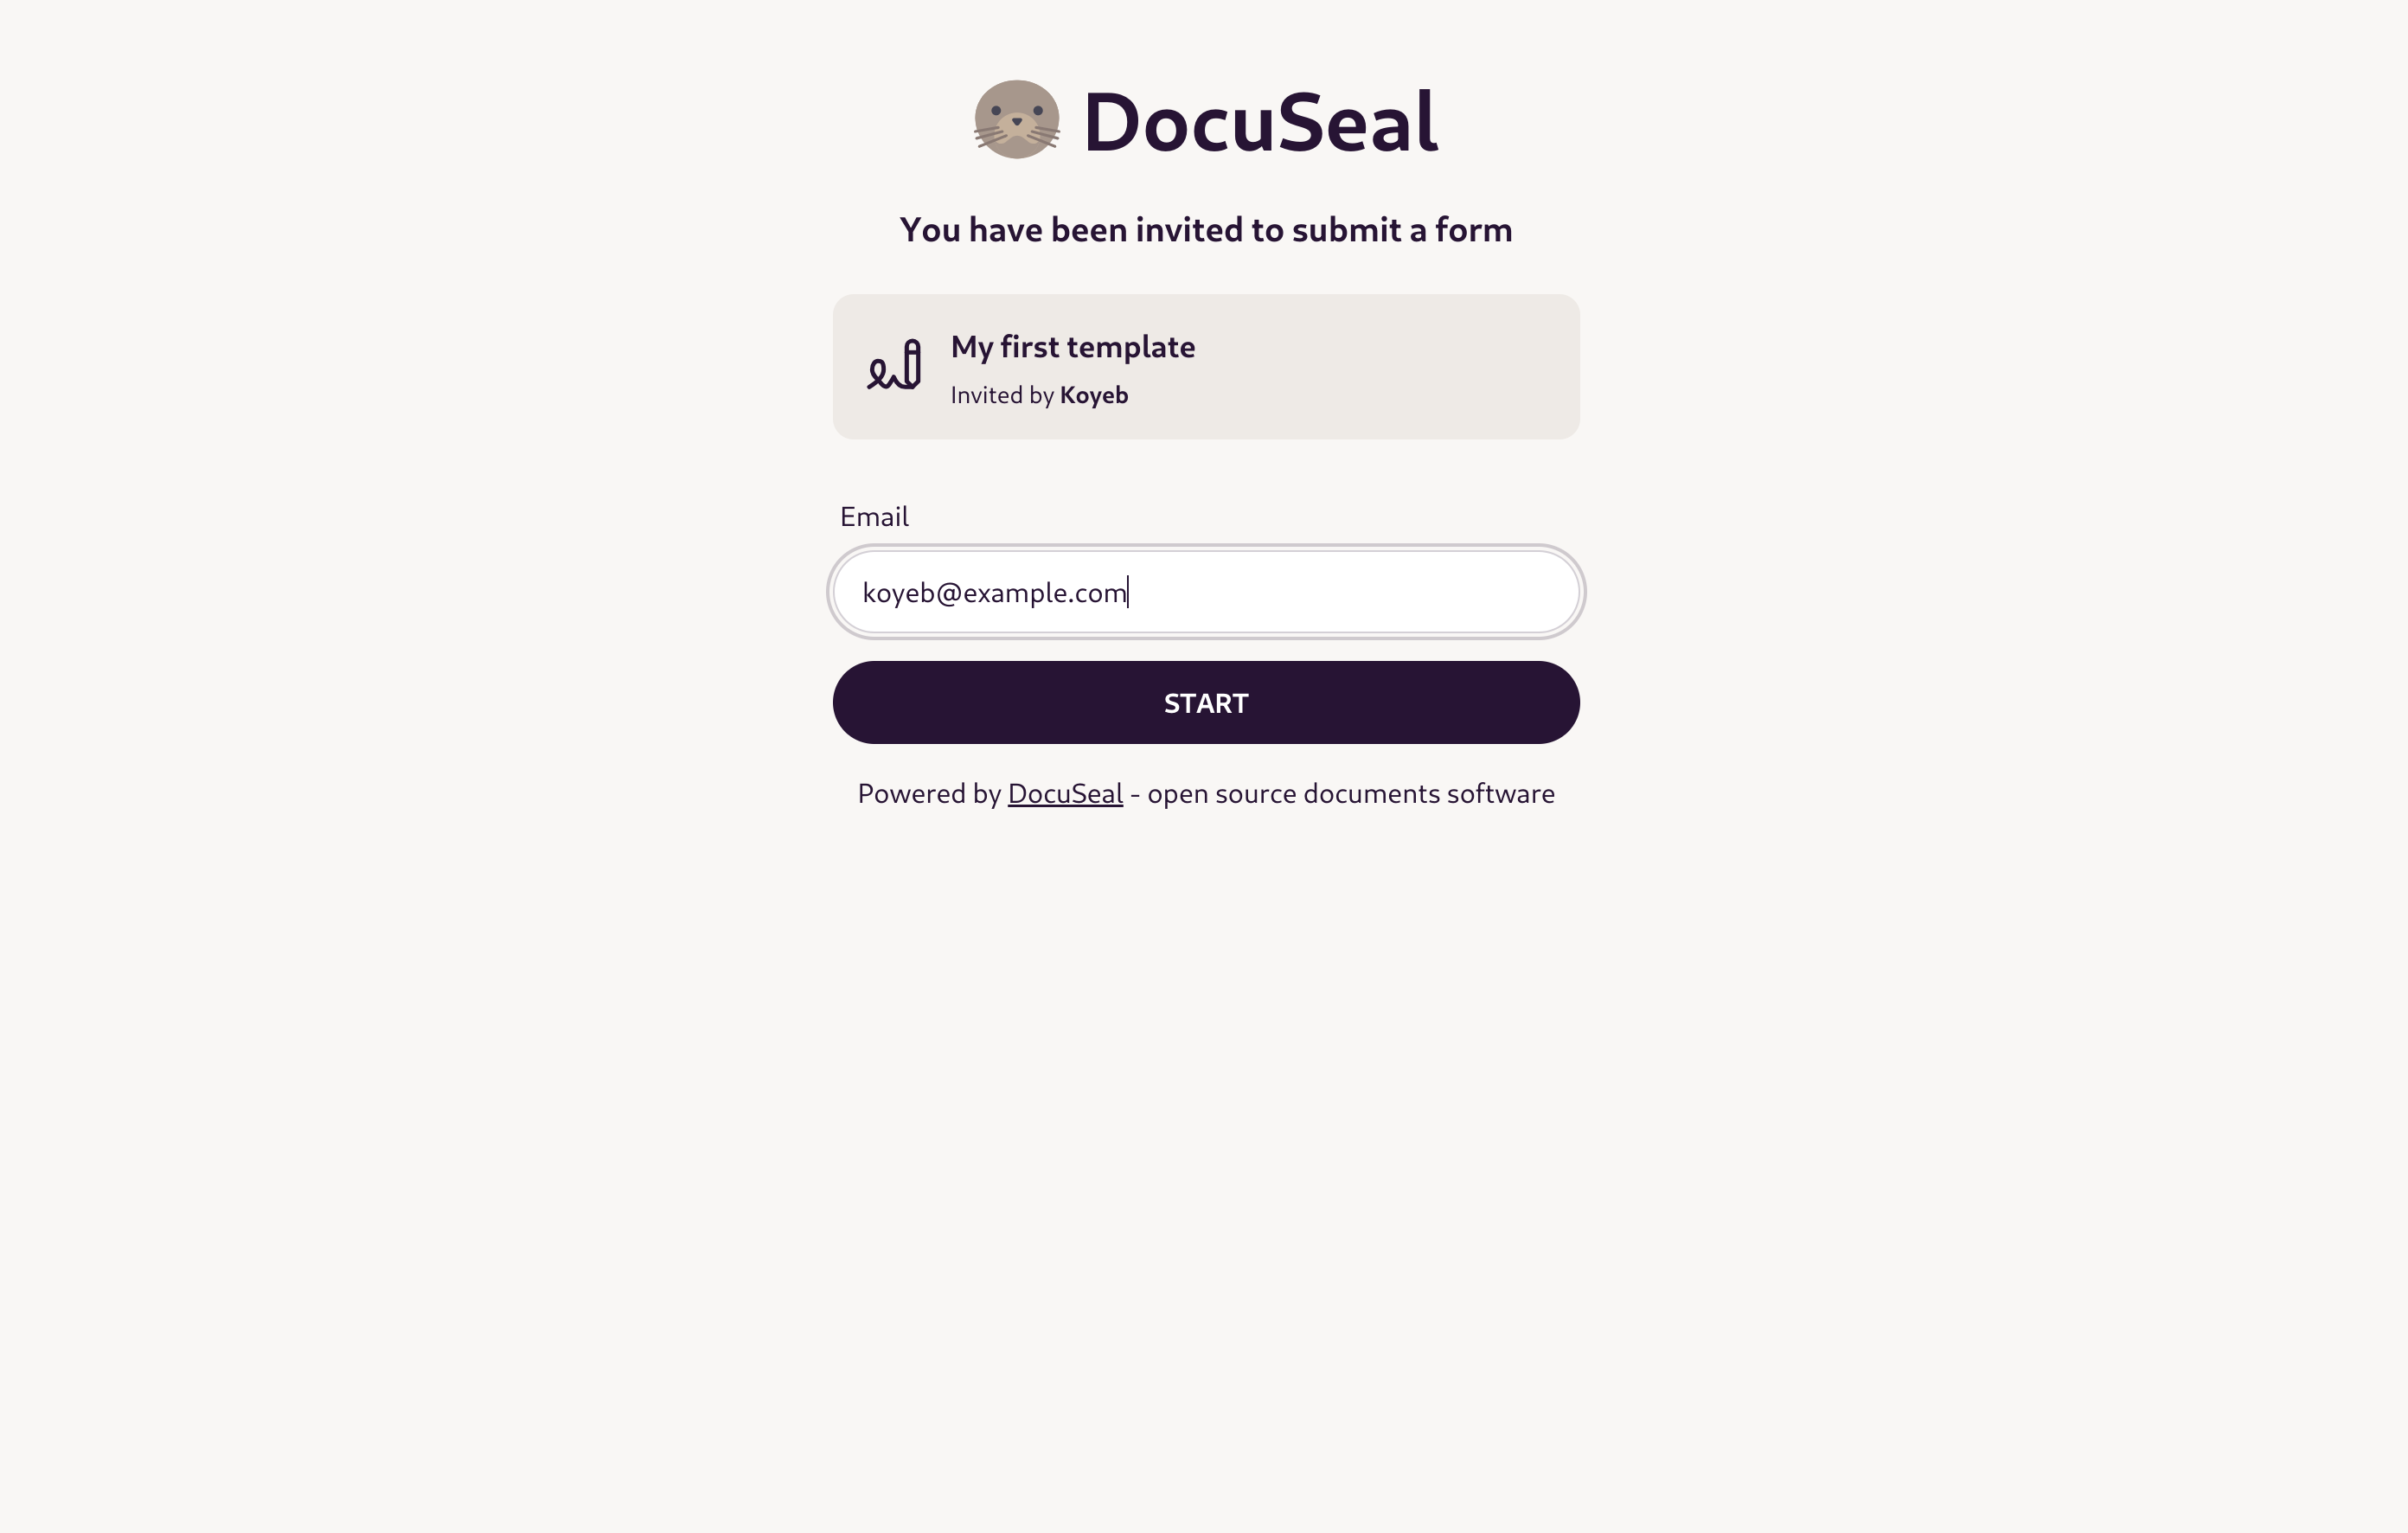 DocuSeal fill in authorized email